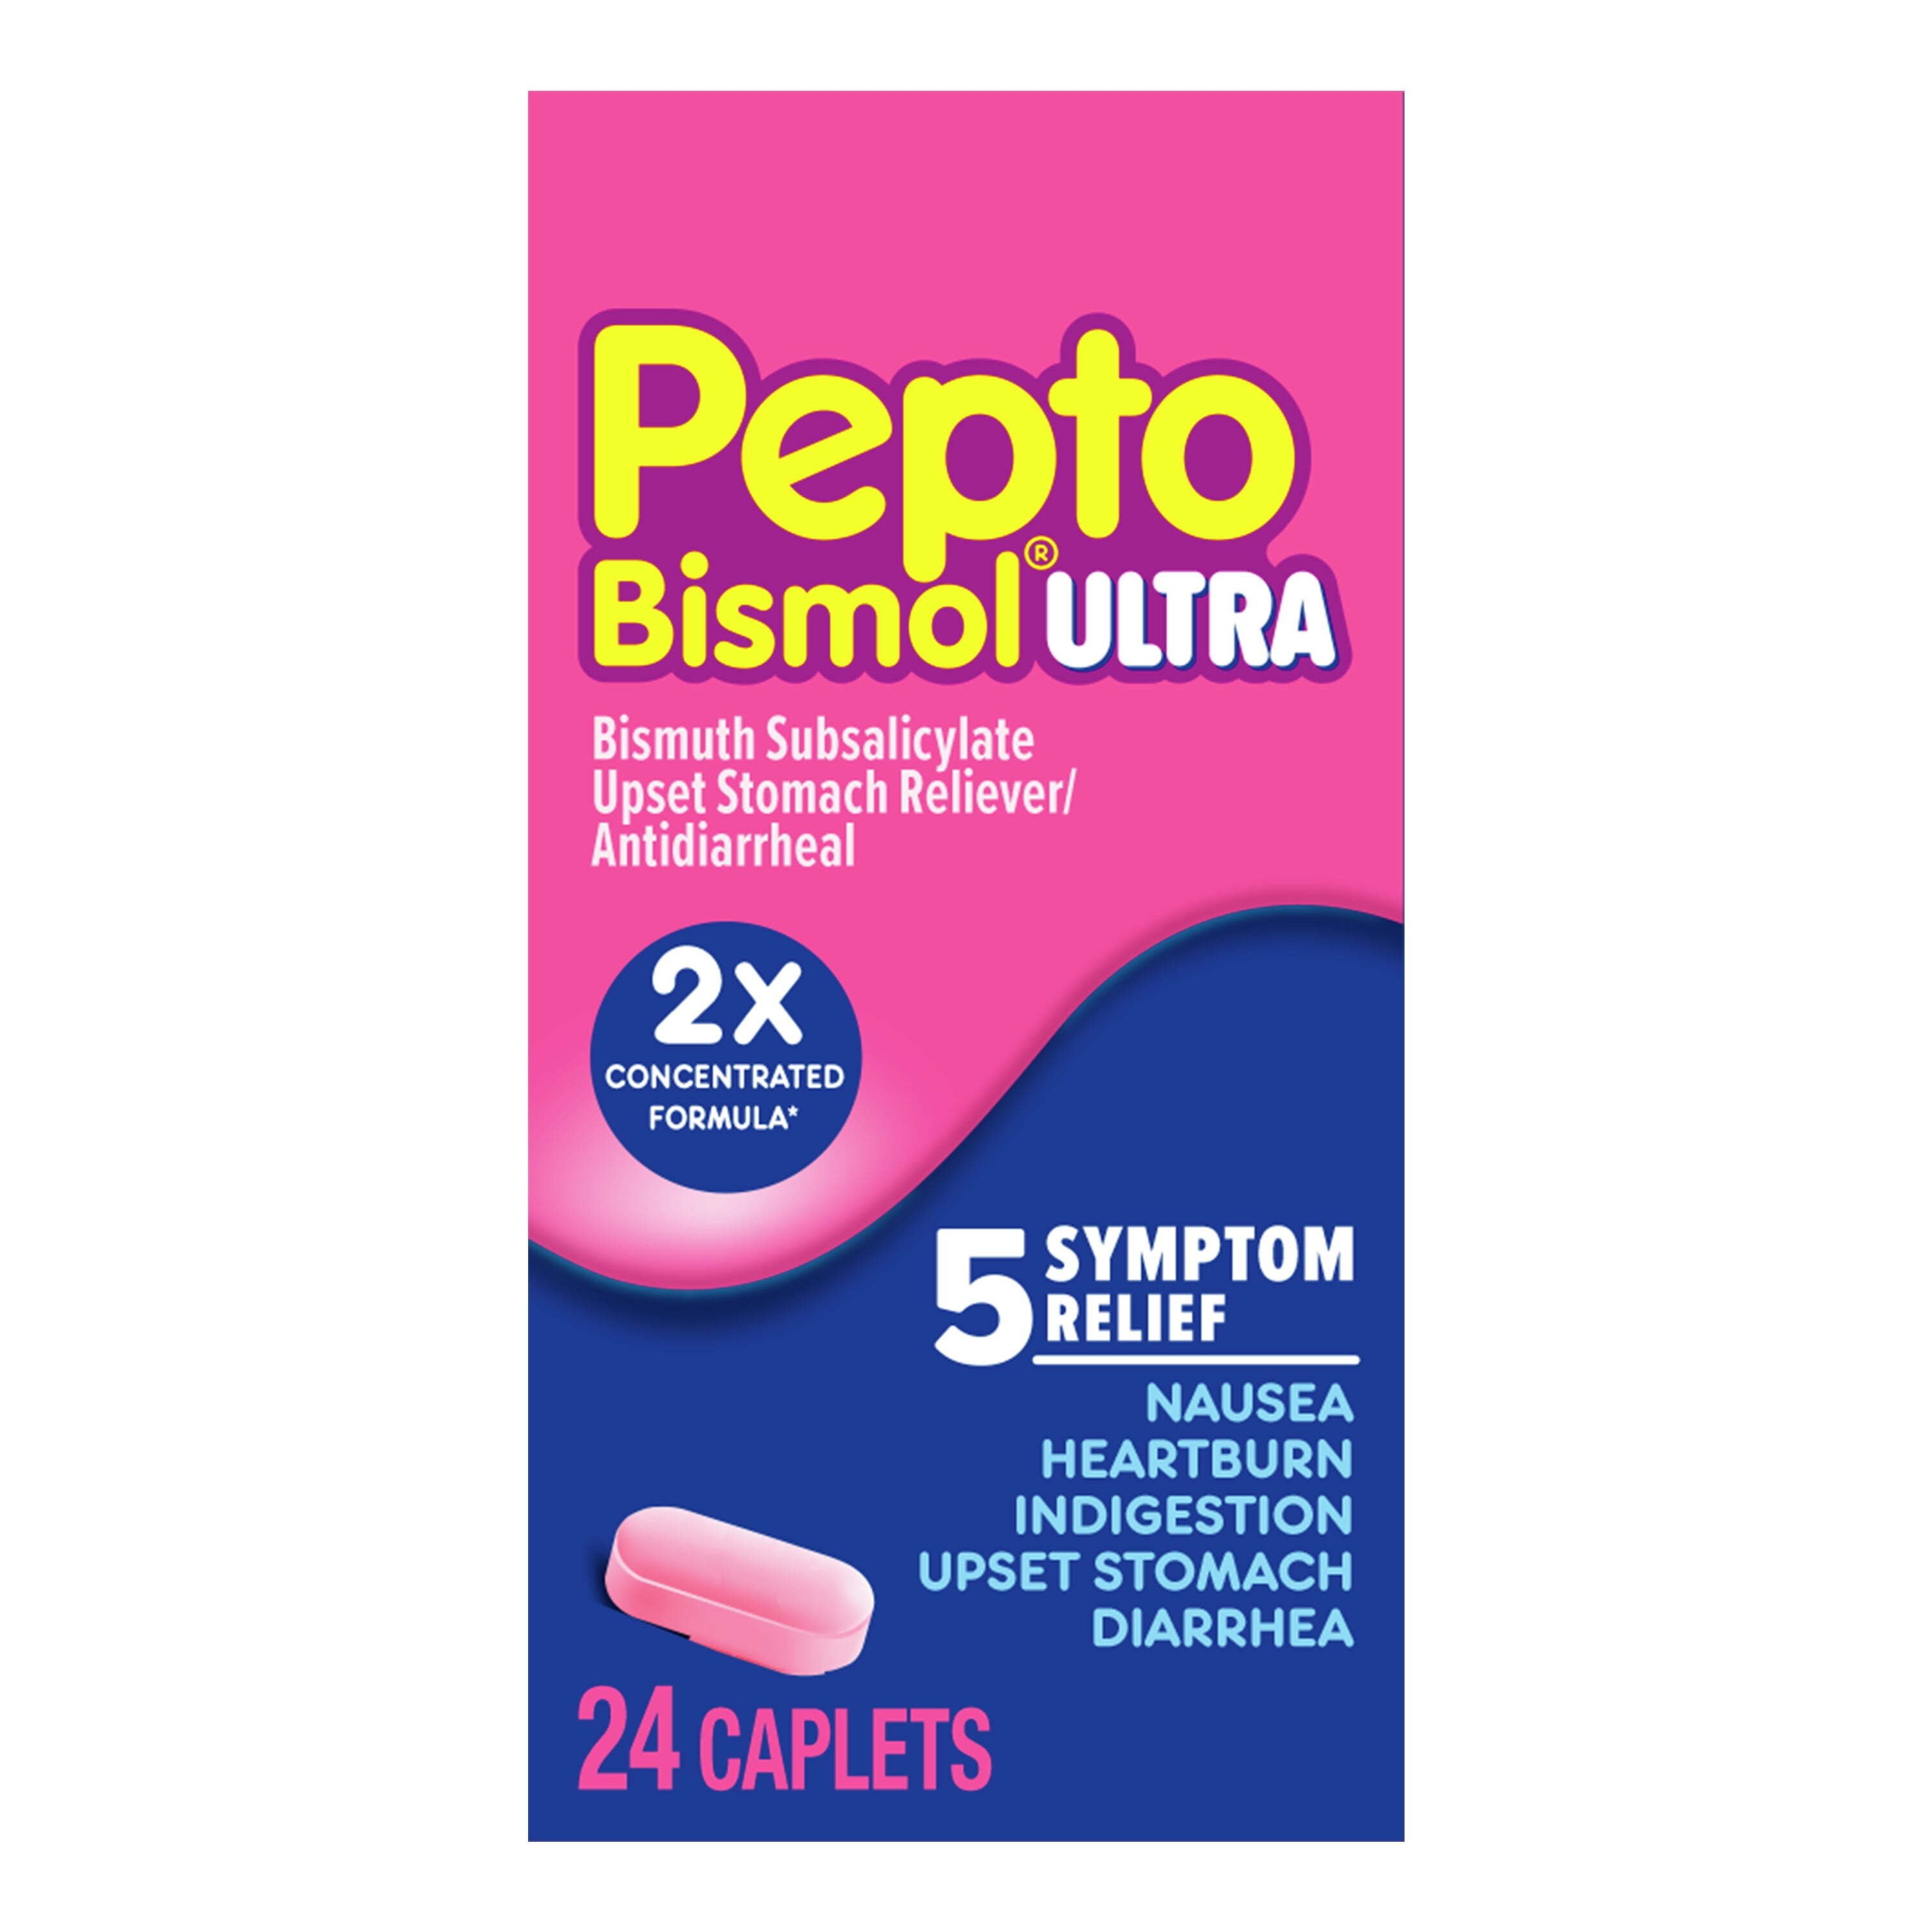 Pepto Bismol Ultra Caplets for Upset Stomach & Diarrhea Relief, Over-the-Counter Medicine, 24 Ct - image 1 of 12